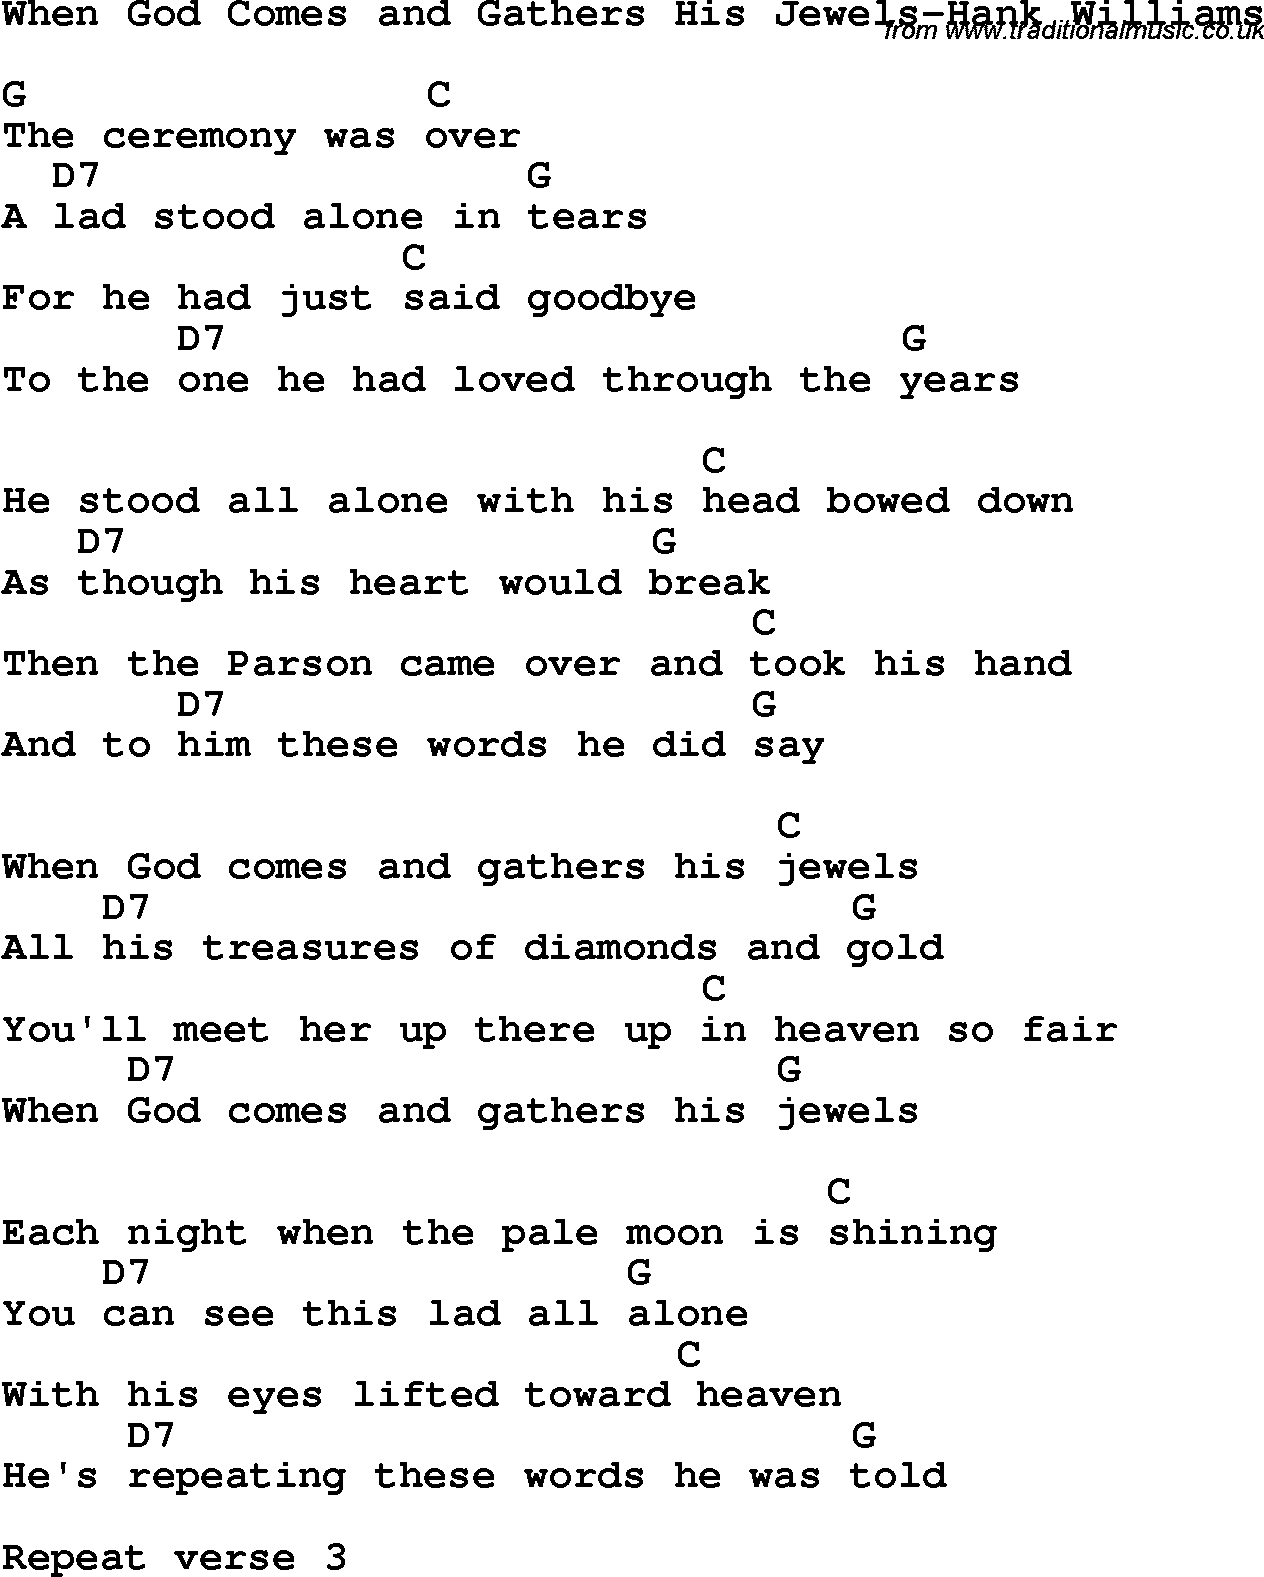 Country, Southern and Bluegrass Gospel Song When God Comes and Gathers His Jewels-Hank Williams lyrics and chords